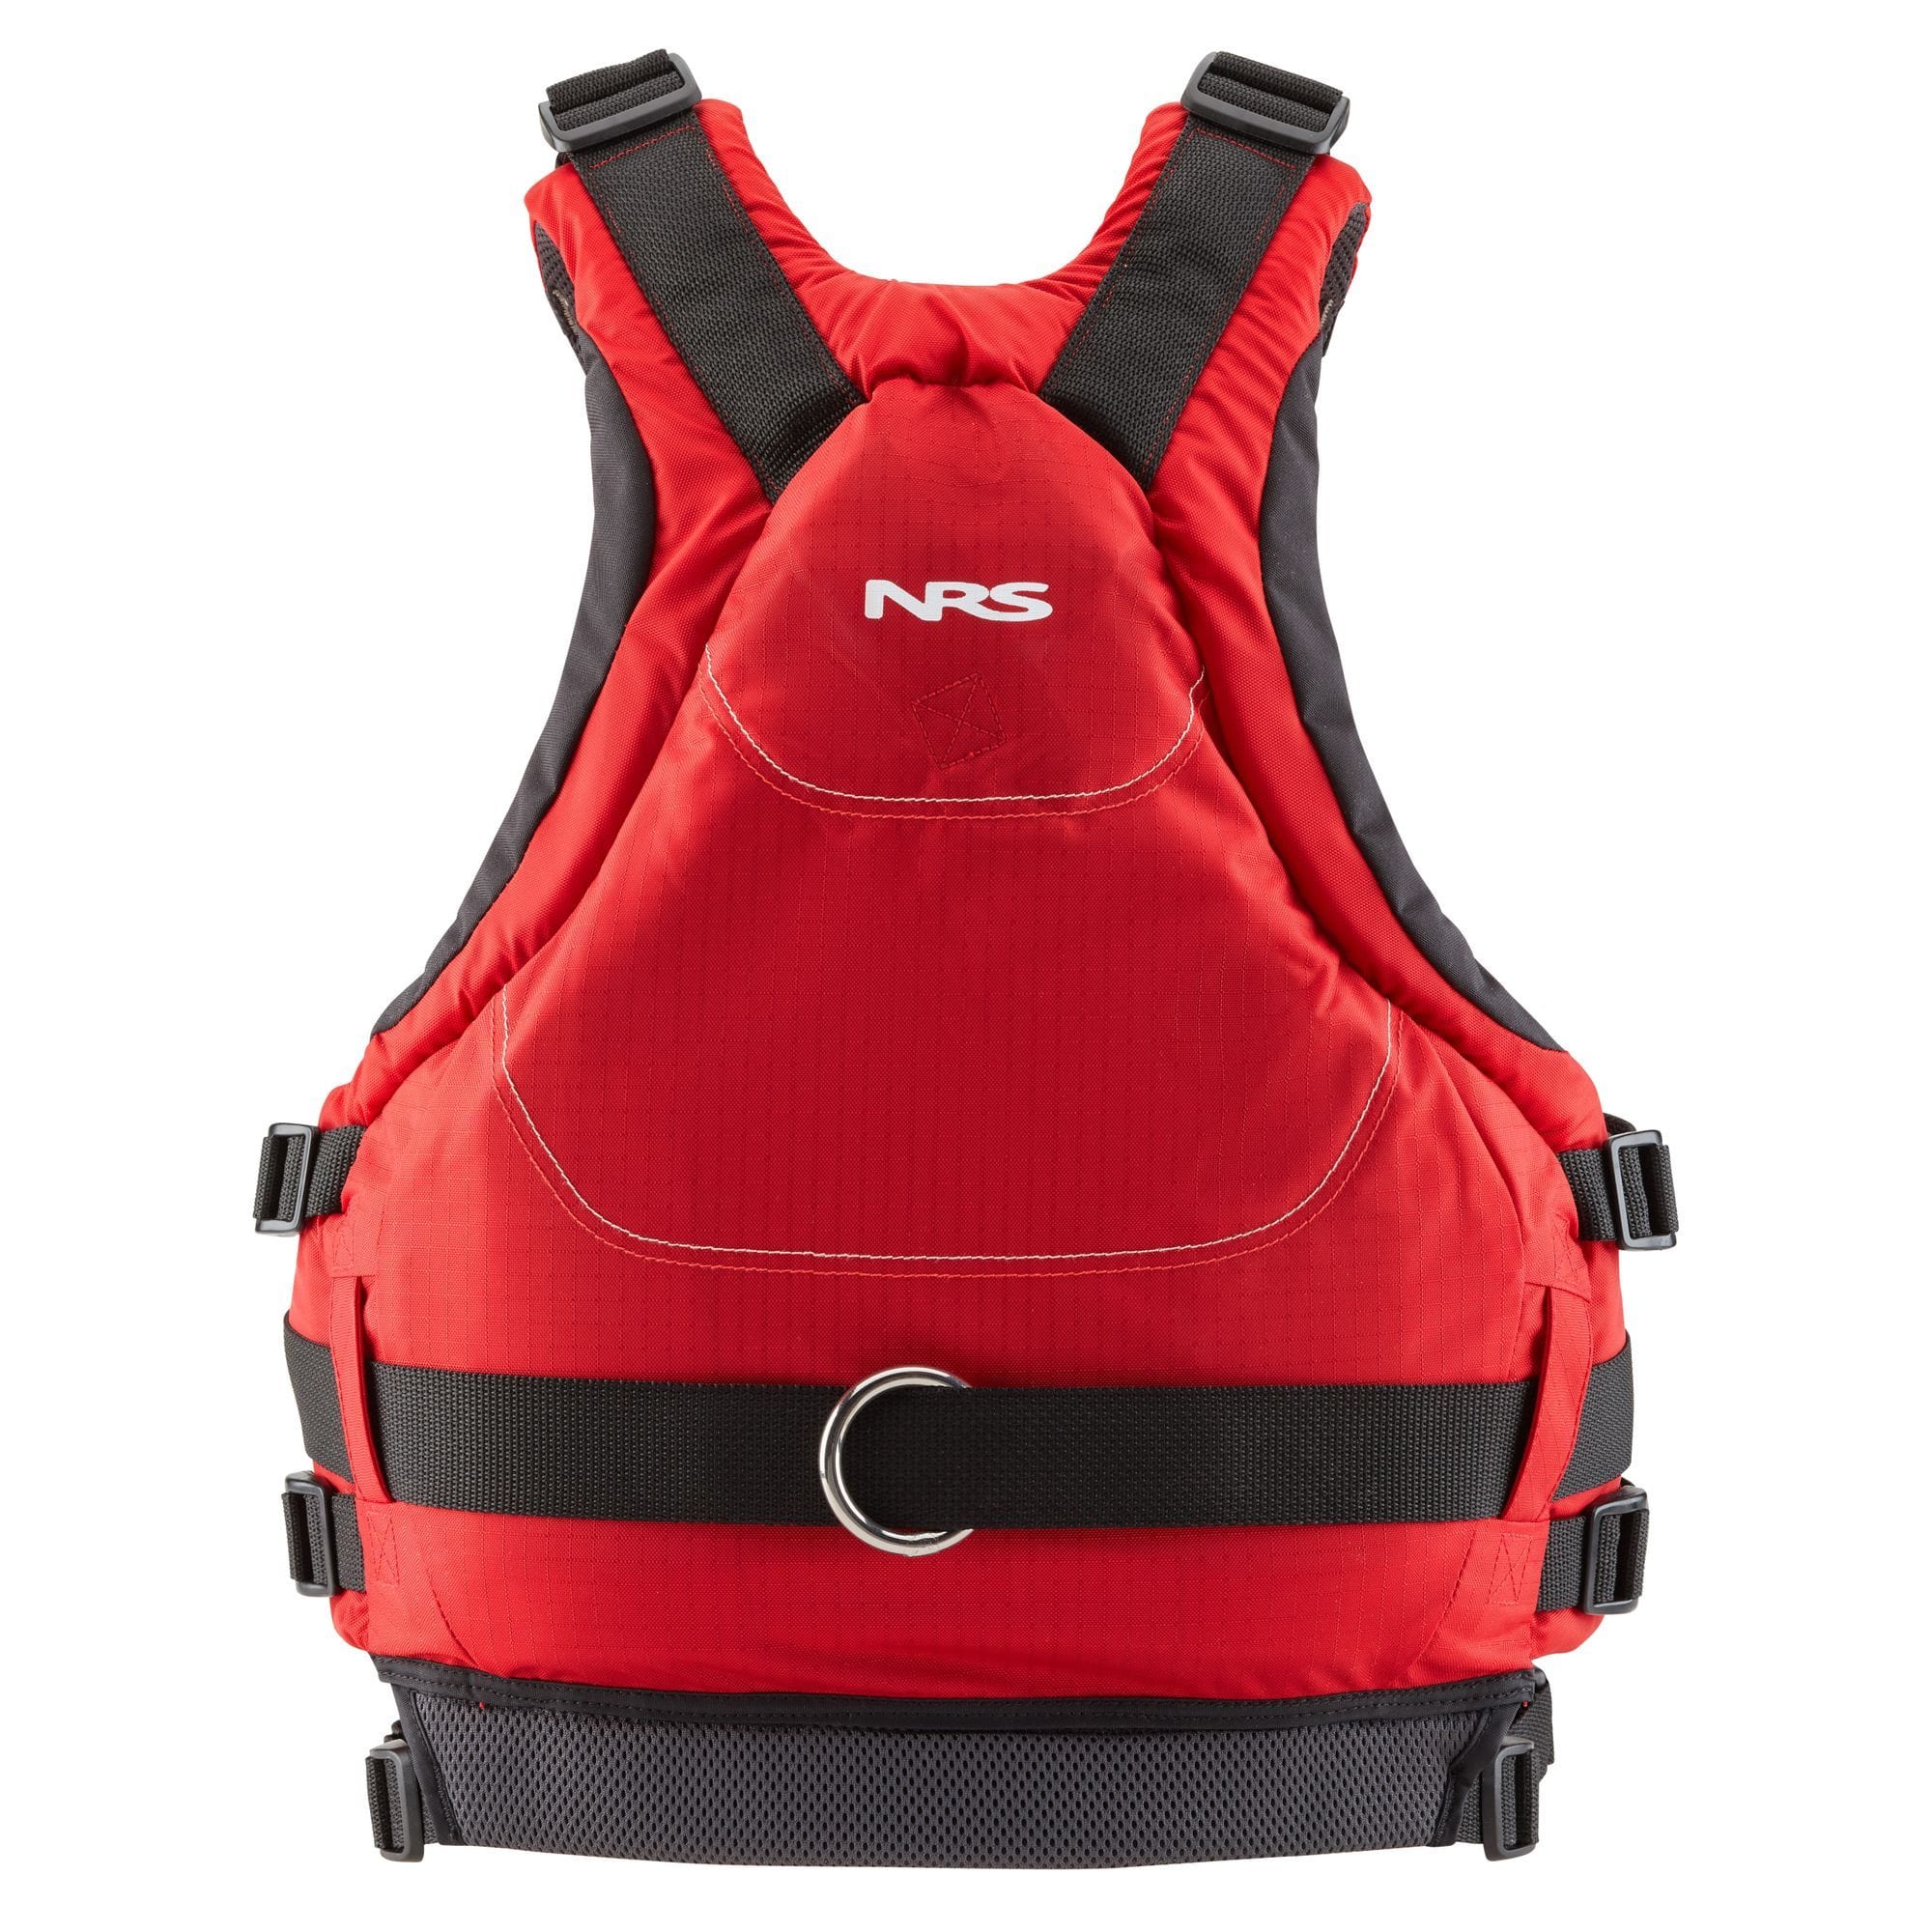 NRS Adult Unisex Adult Small Paddle Personal Flotation Device in